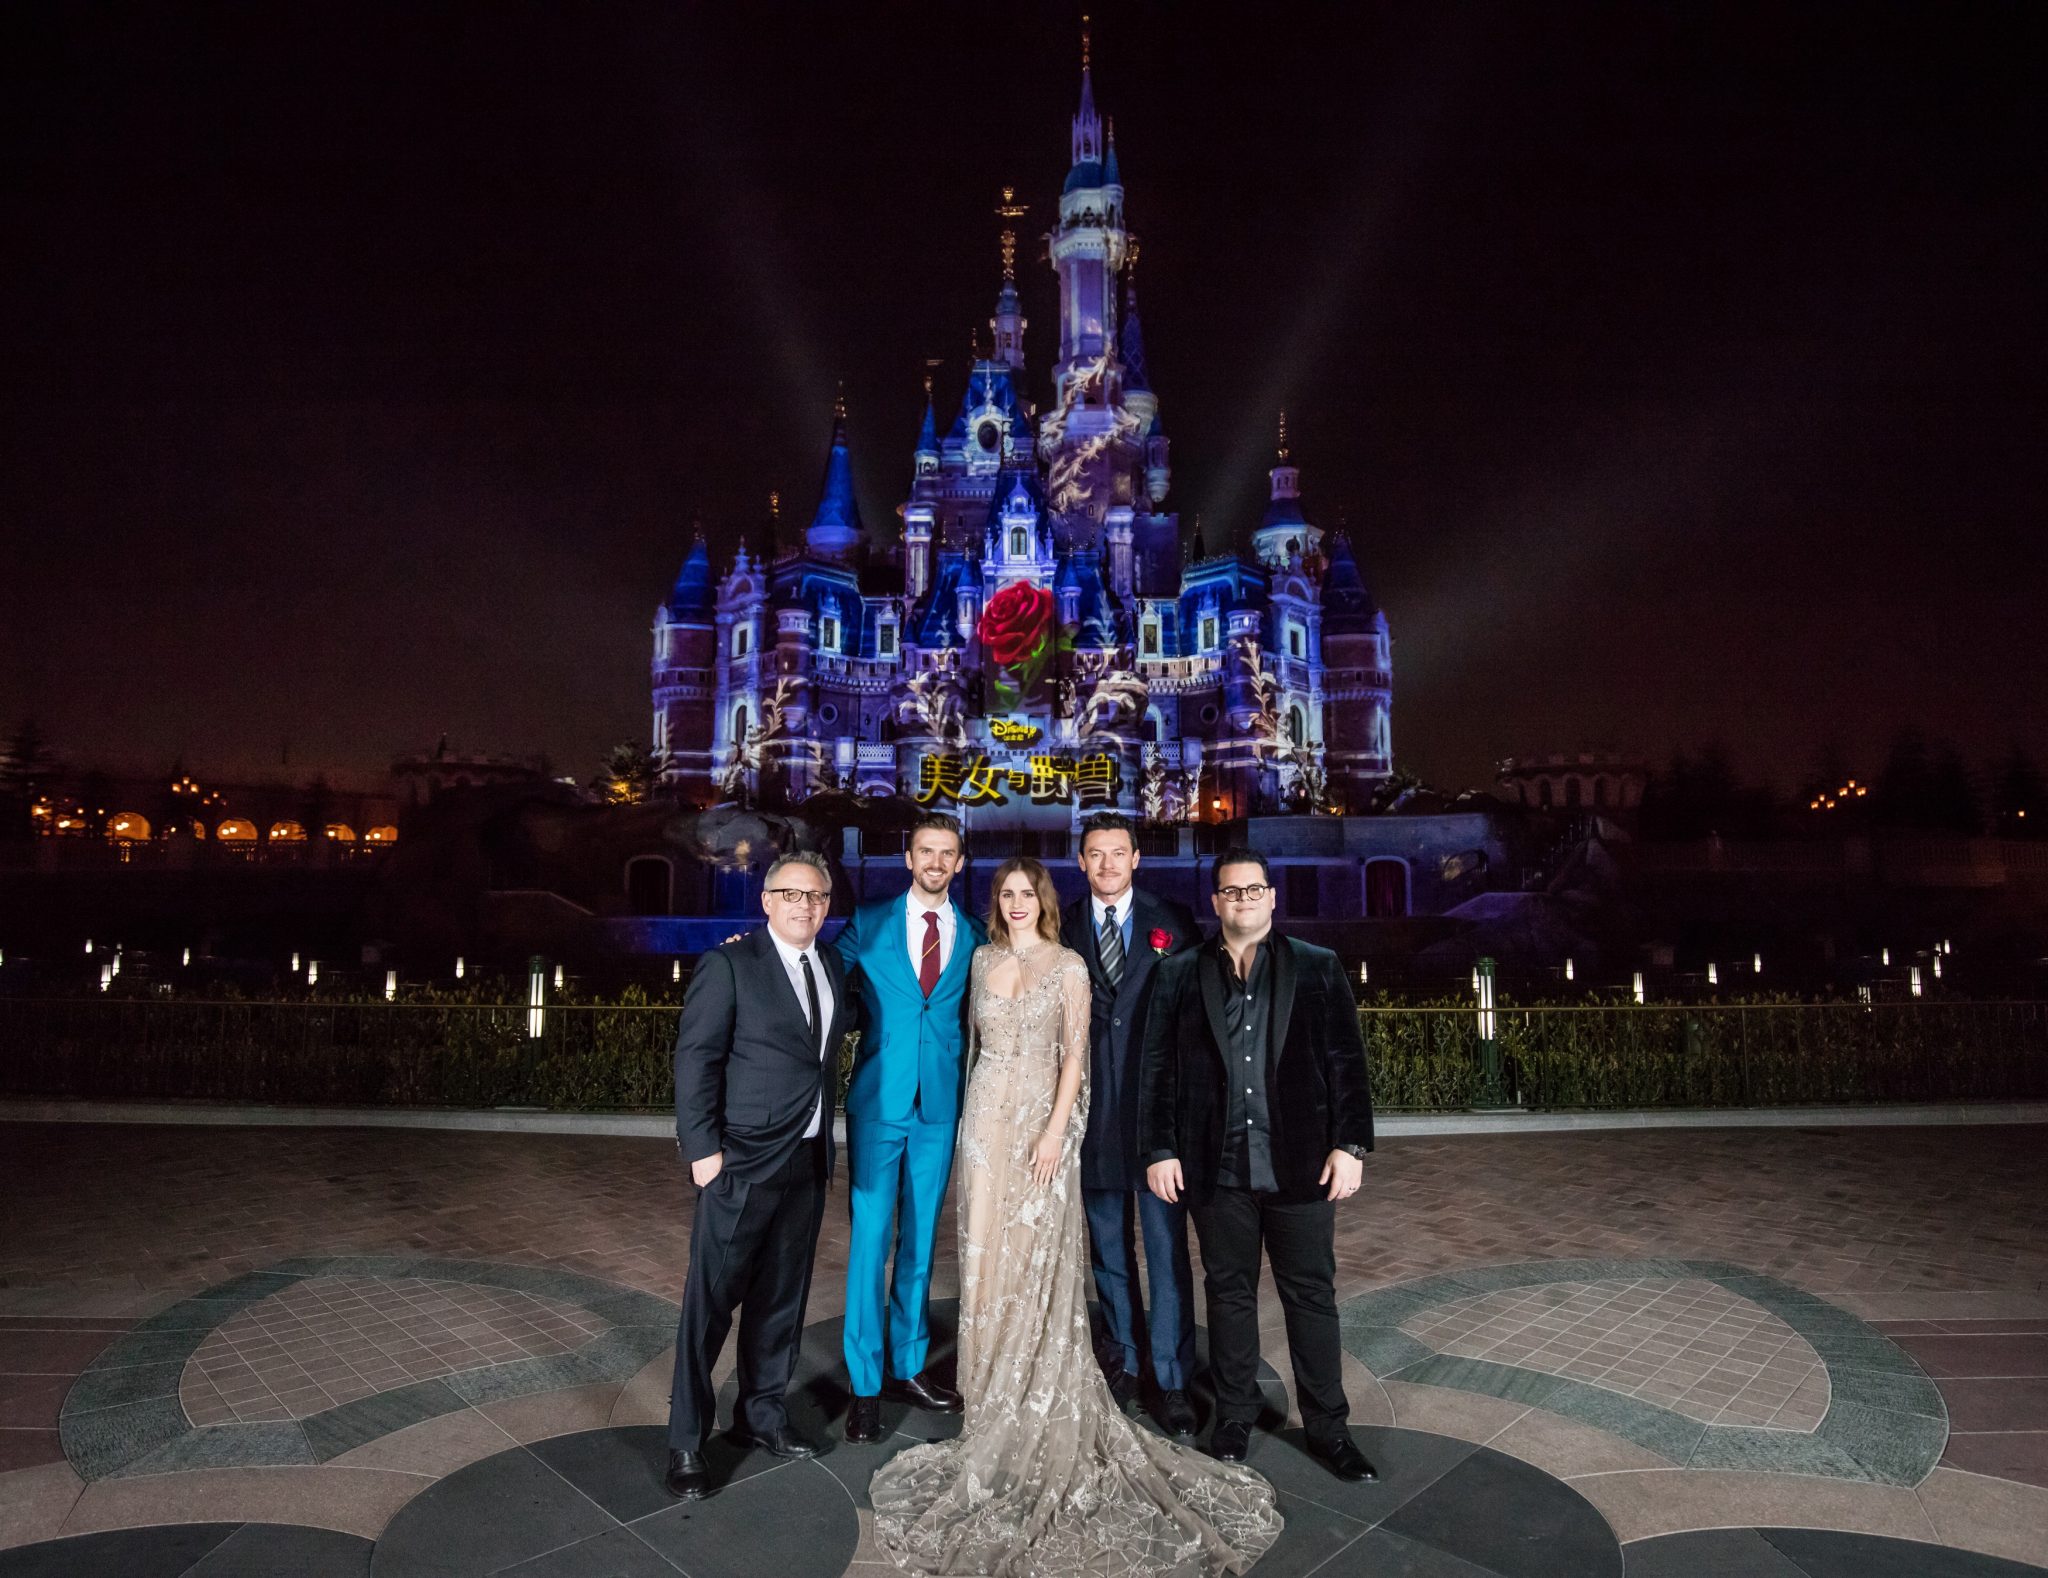 The Cast of “Beauty and the Beast” Dazzle at Shanghai and Shanghai Disneyland